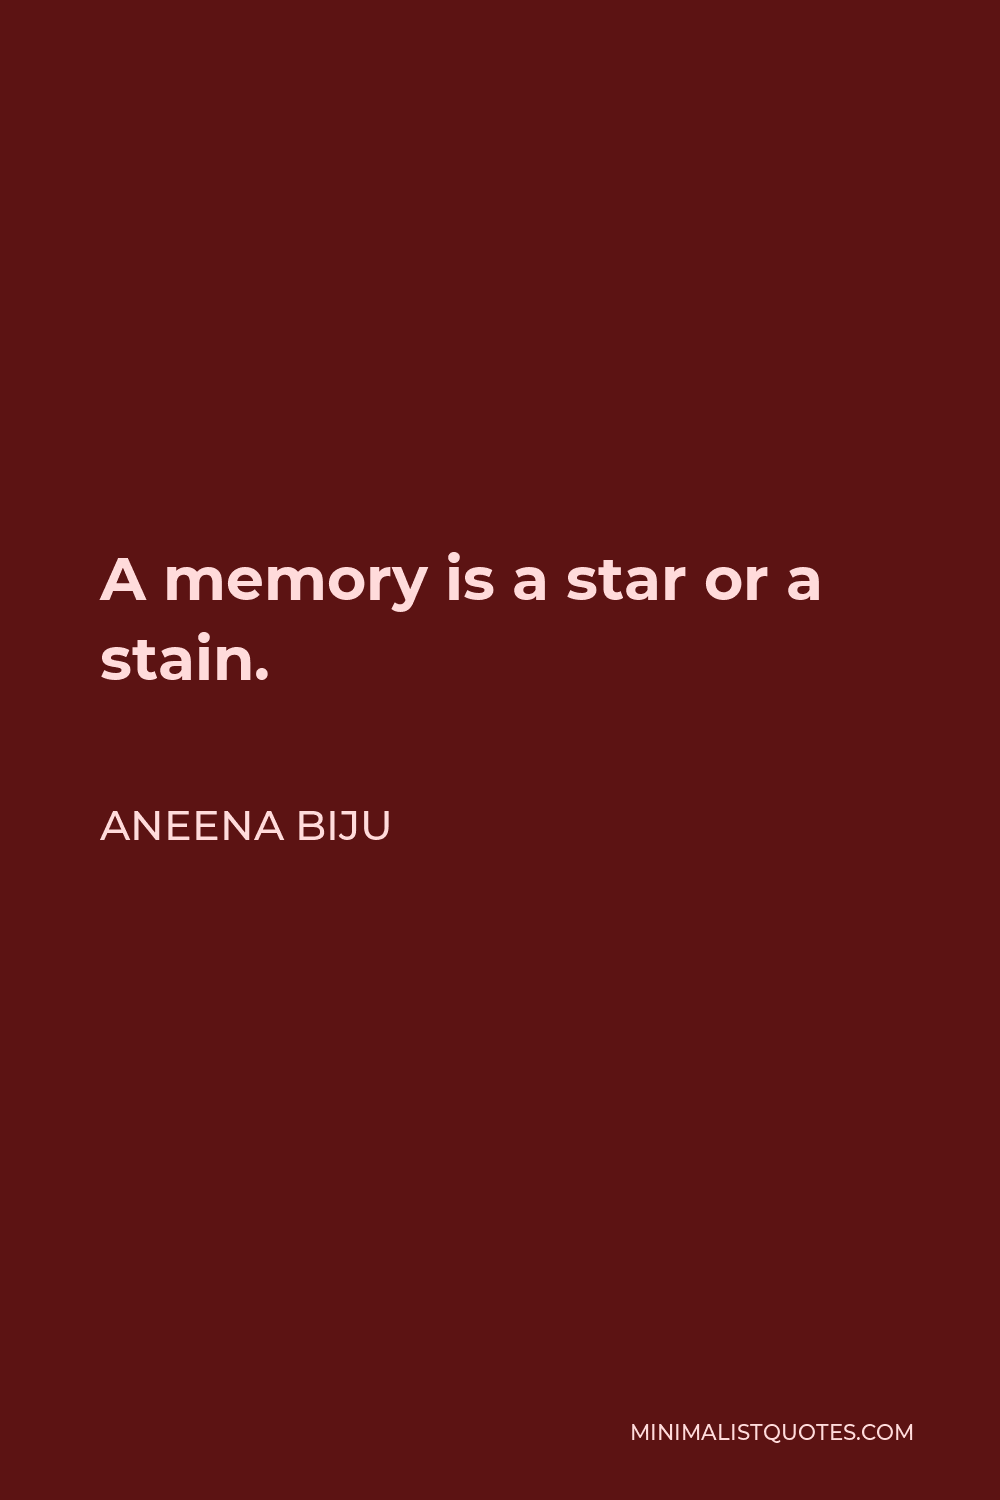 Aneena Biju Quote - A memory is a star or a stain.